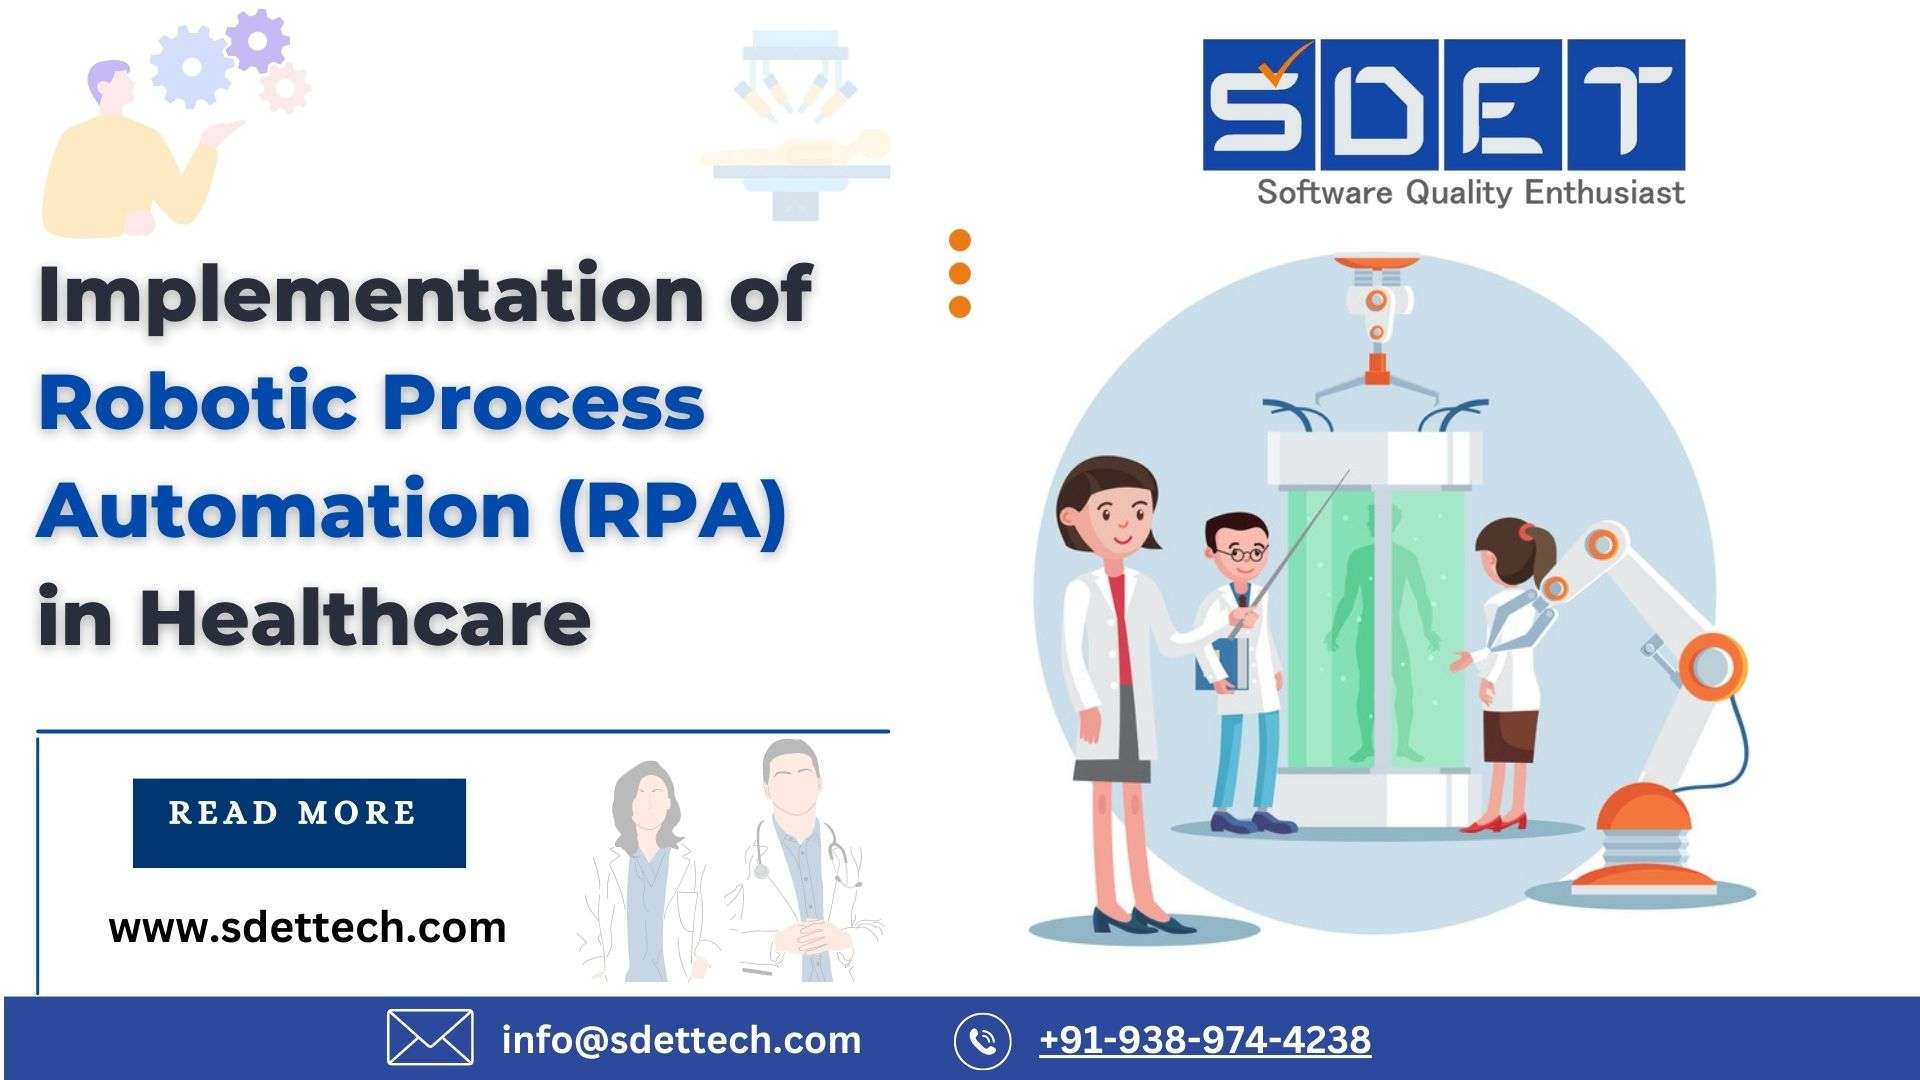 Implementation of Robotic Process Automation (RPA) in Healthcare